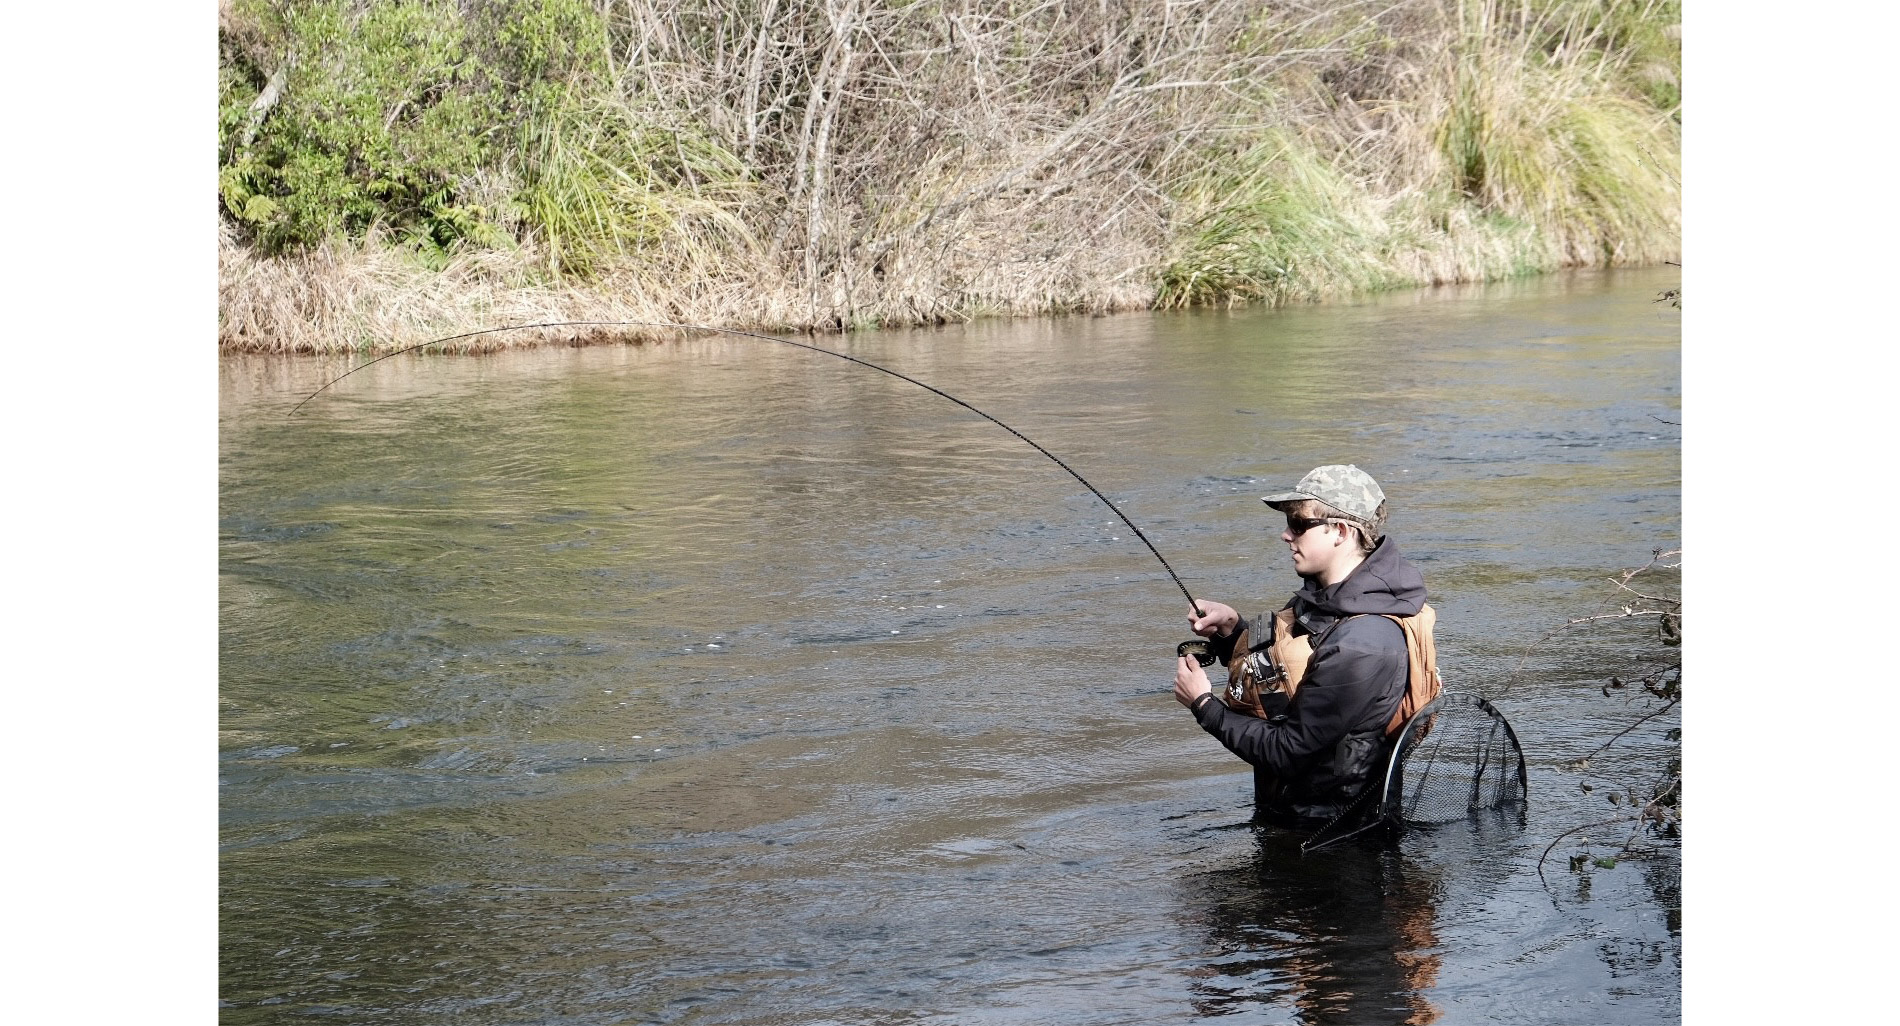 Fly Fishing With Kids - A Young Kiwi Champ's Fishing Advice